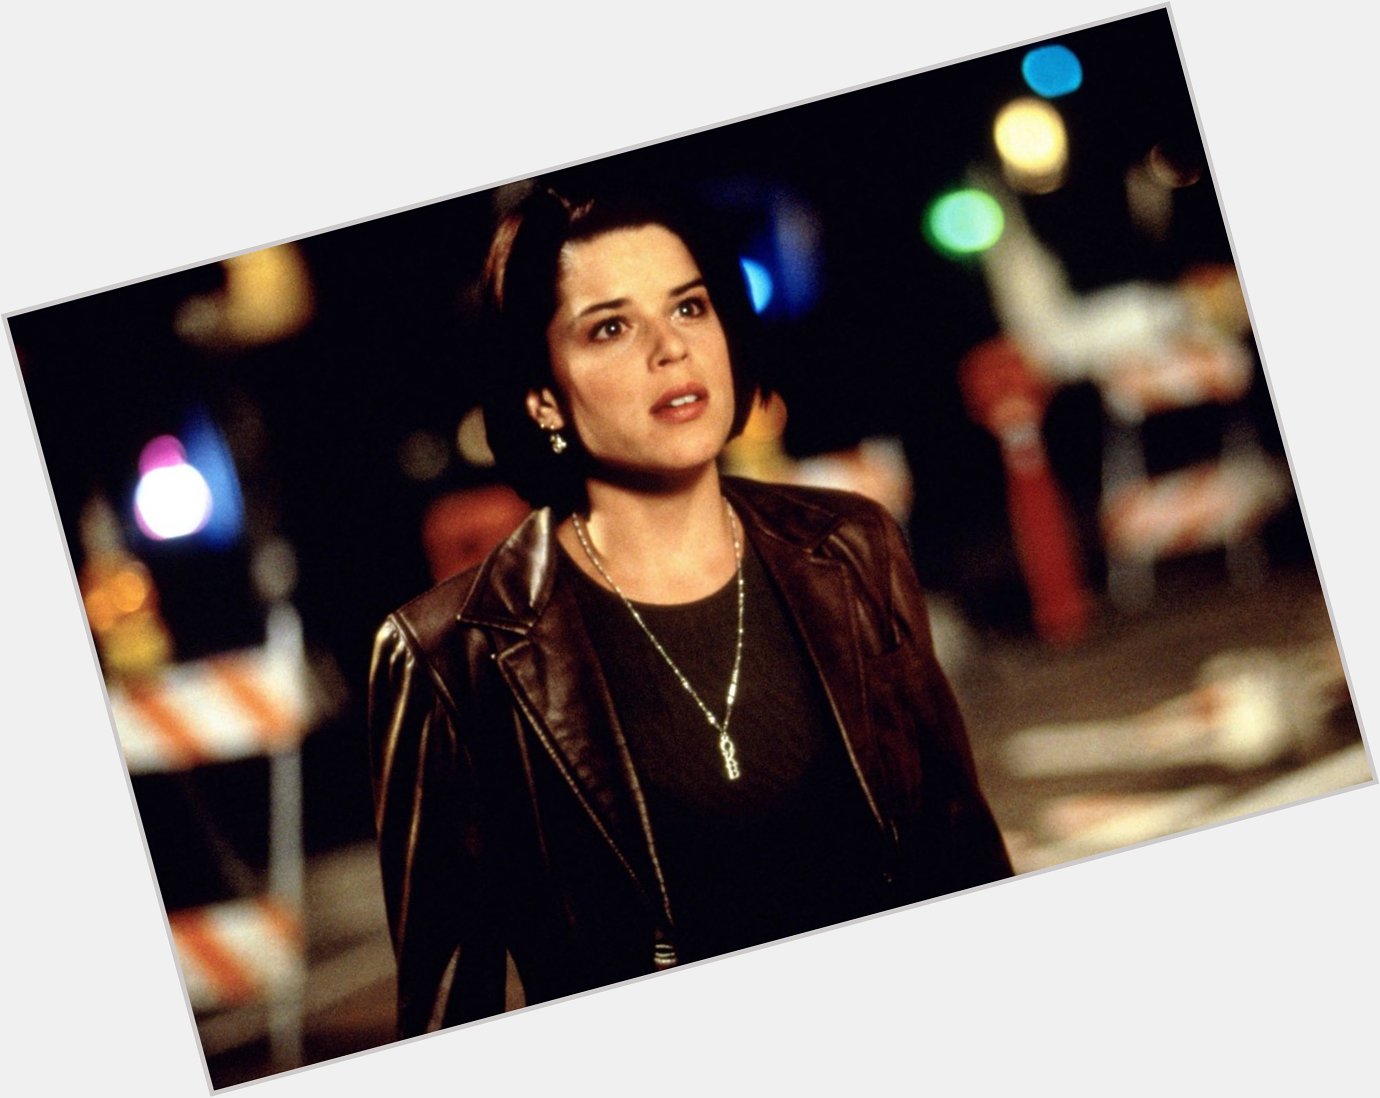 Happy birthday to miss neve campbell, one of the best final girls 